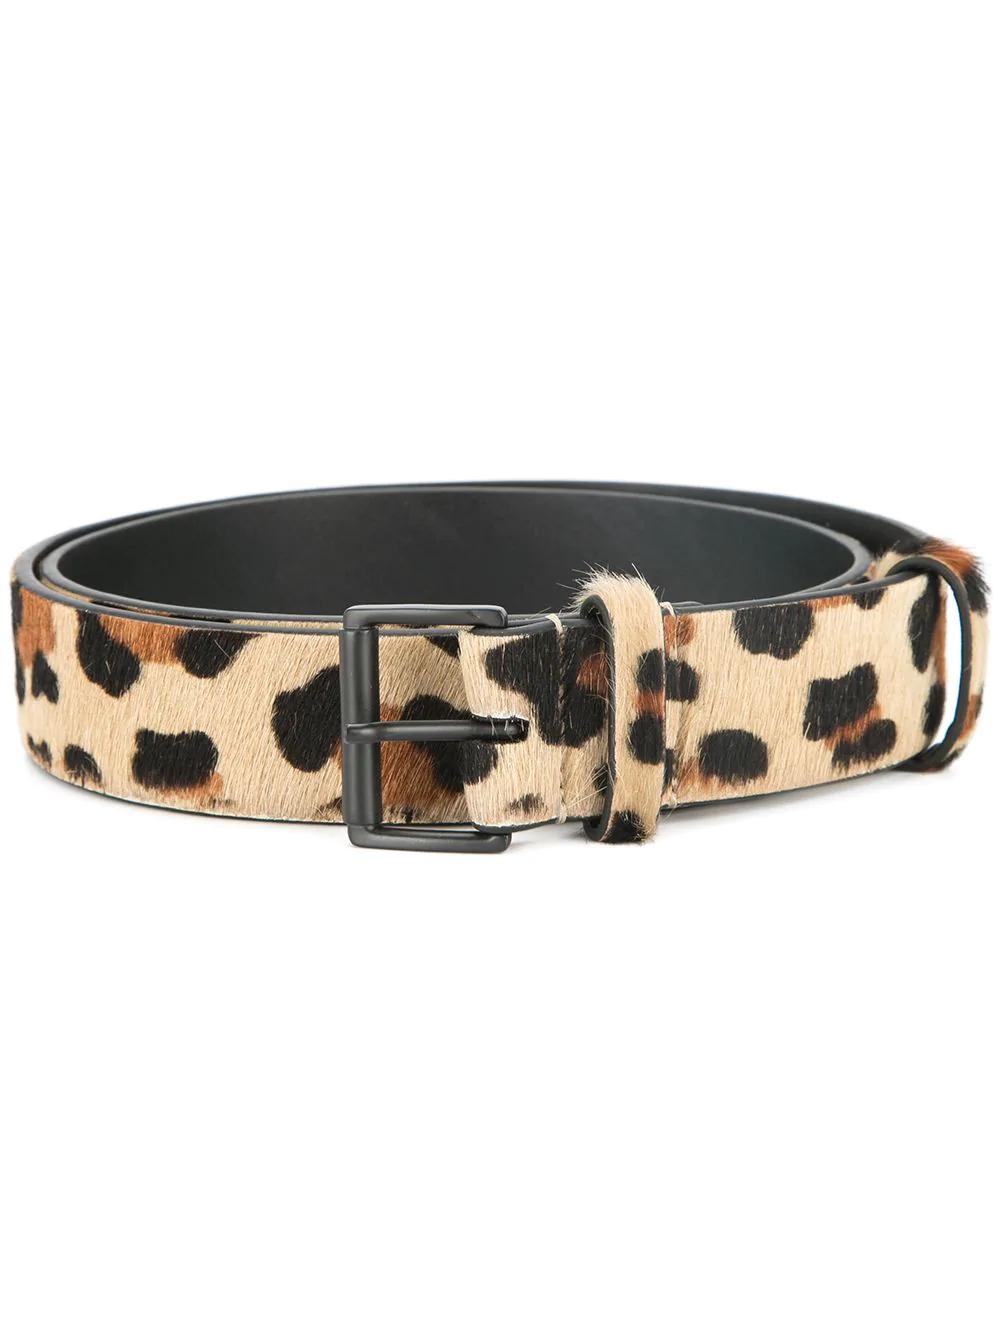 Add These Leopard-Print Belts to Your Closet Now | Who What Wear